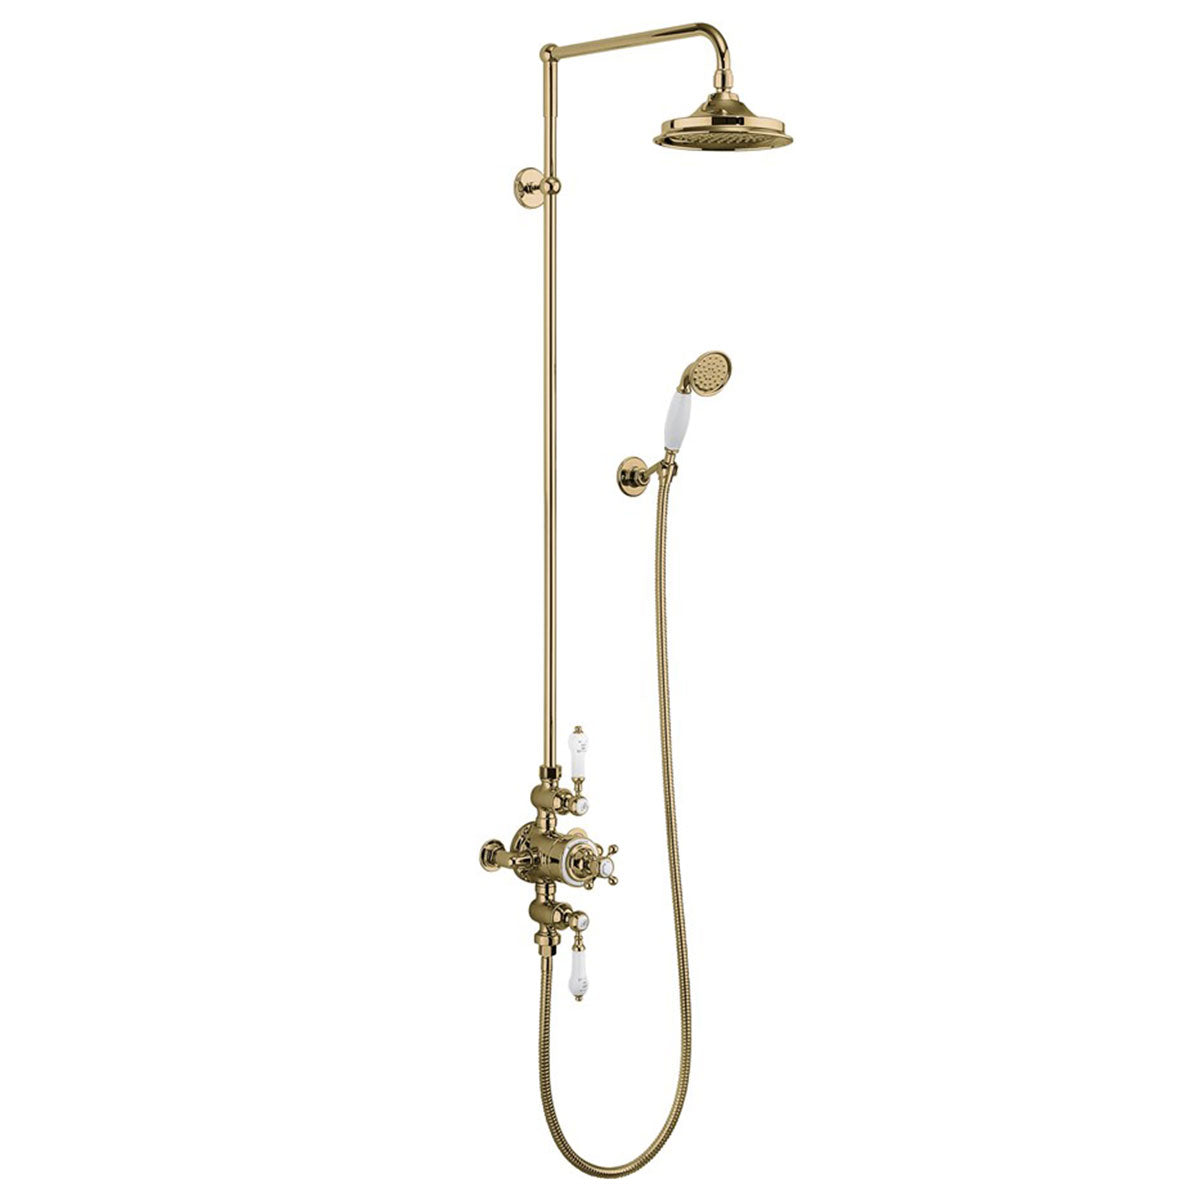 Burlington Avon Exposed Thermostatic Shower with 2 Outlet Valve, Shower Head and Handset - Polished Gold Deluxe Bathrooms UK